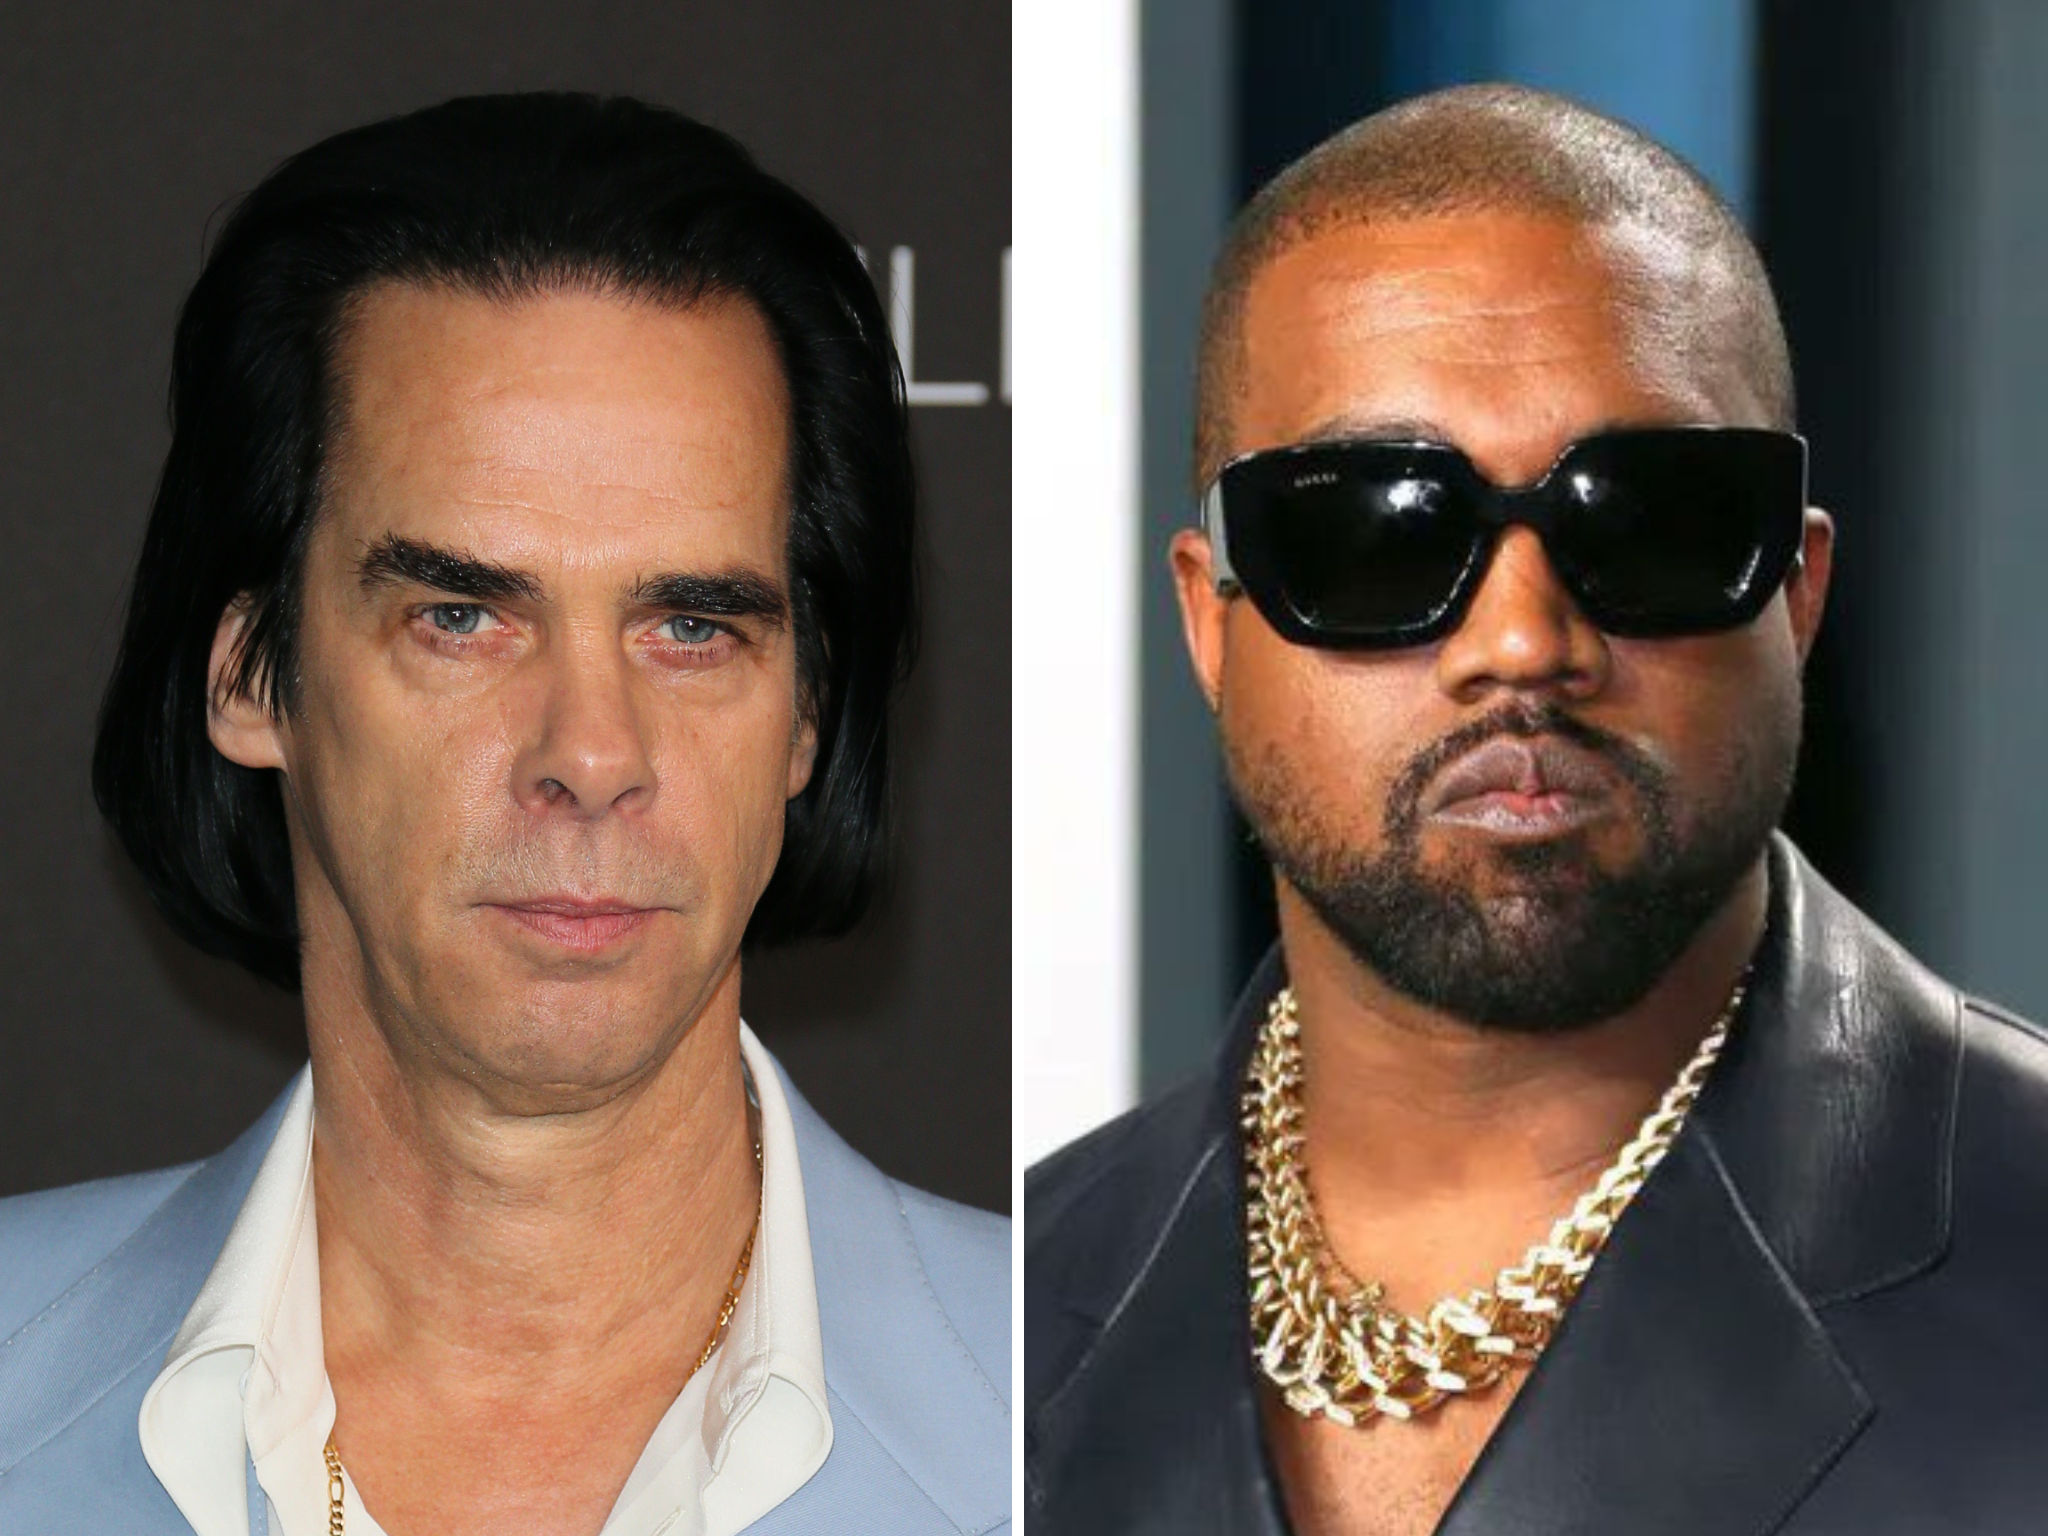 Nick Cave and Kanye West